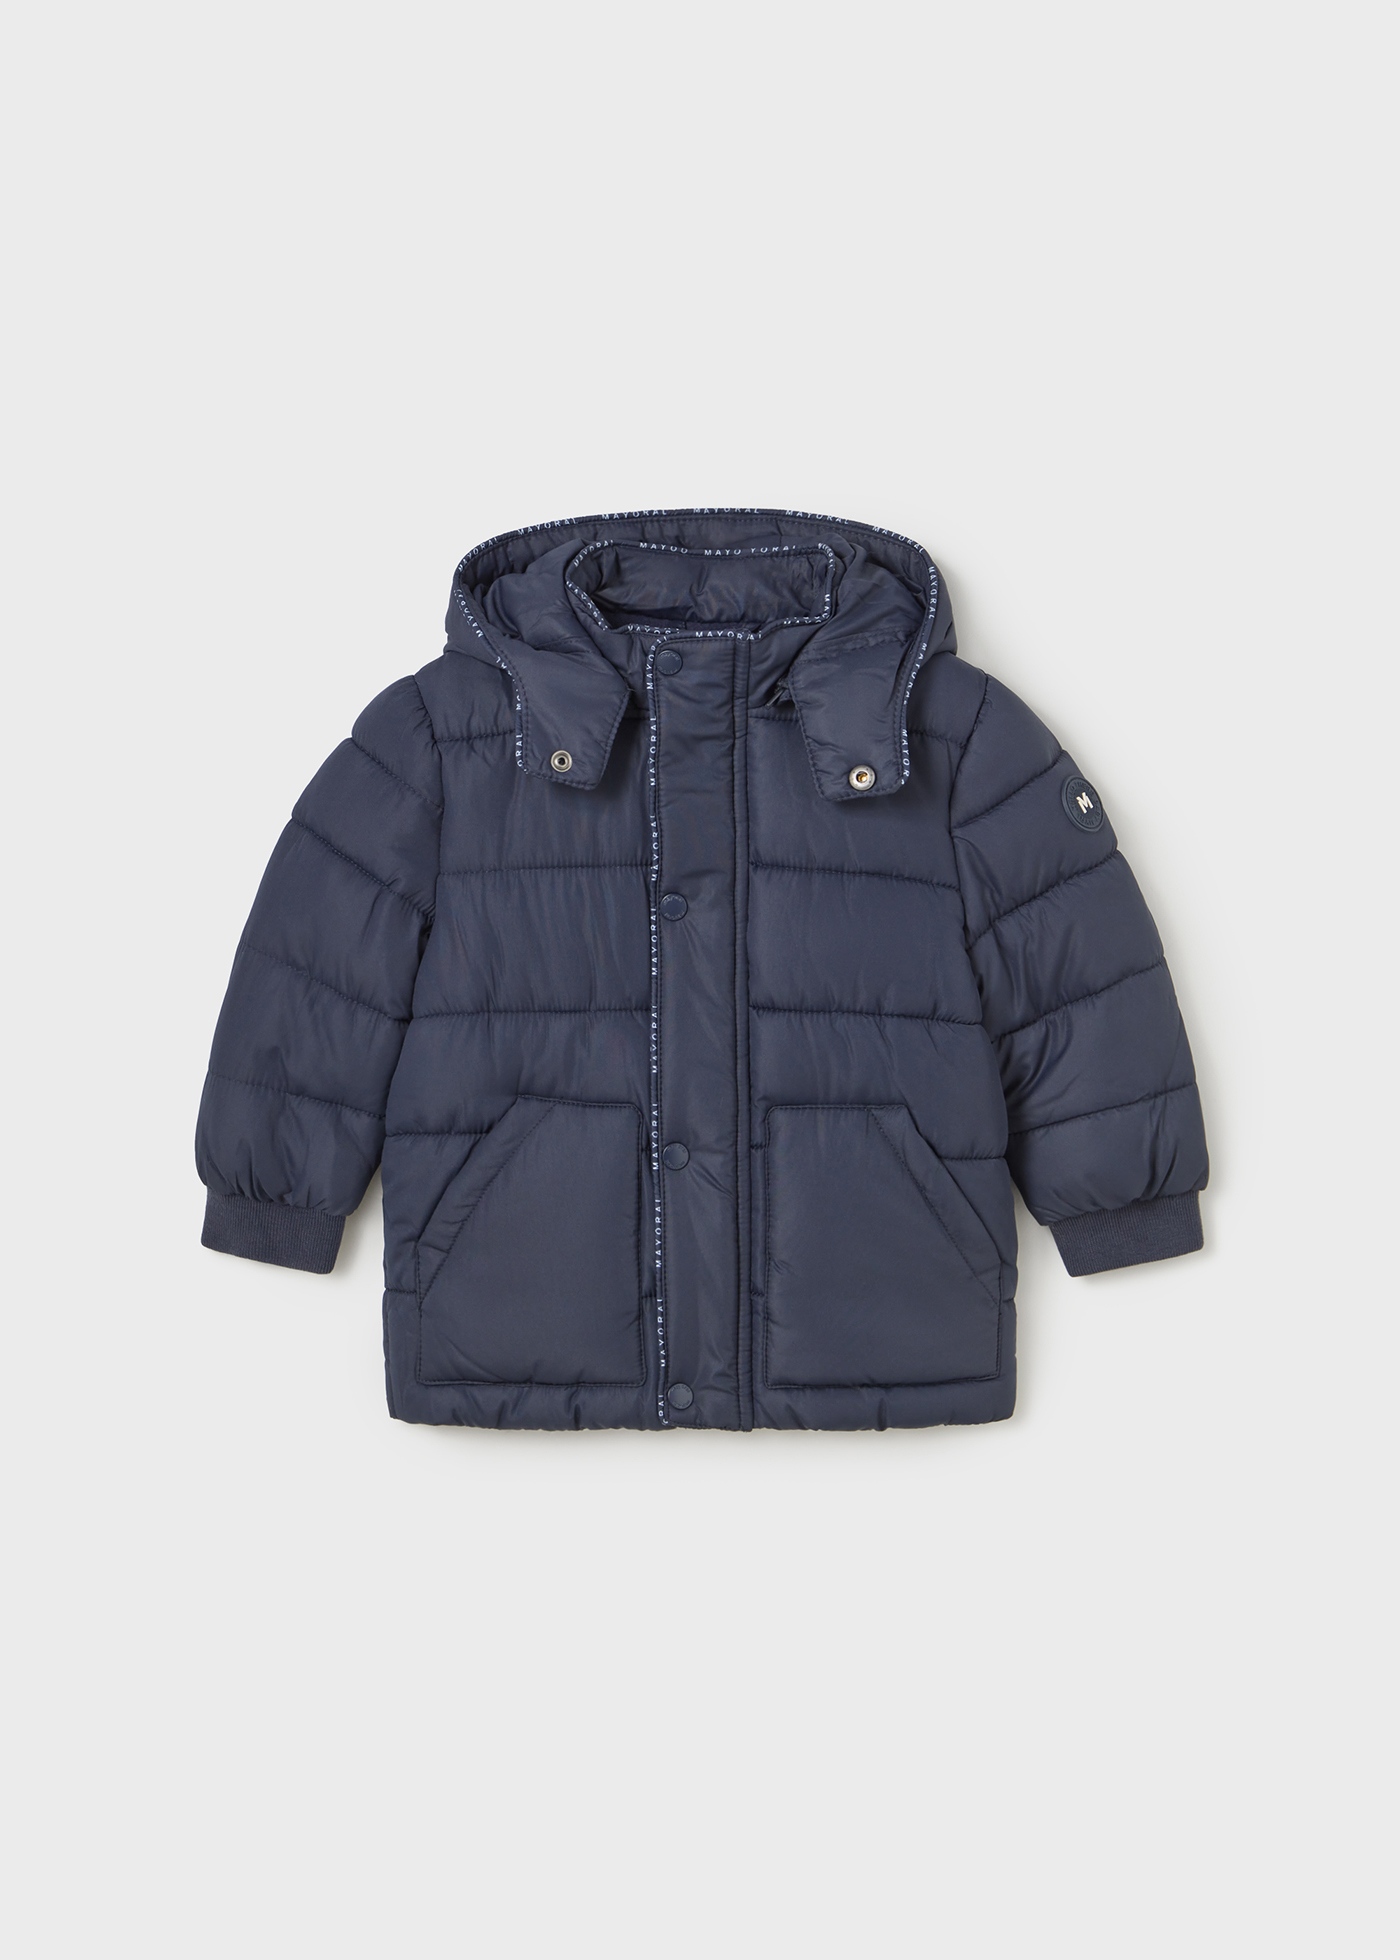 Baby puffer jacket removable hood | Mayoral